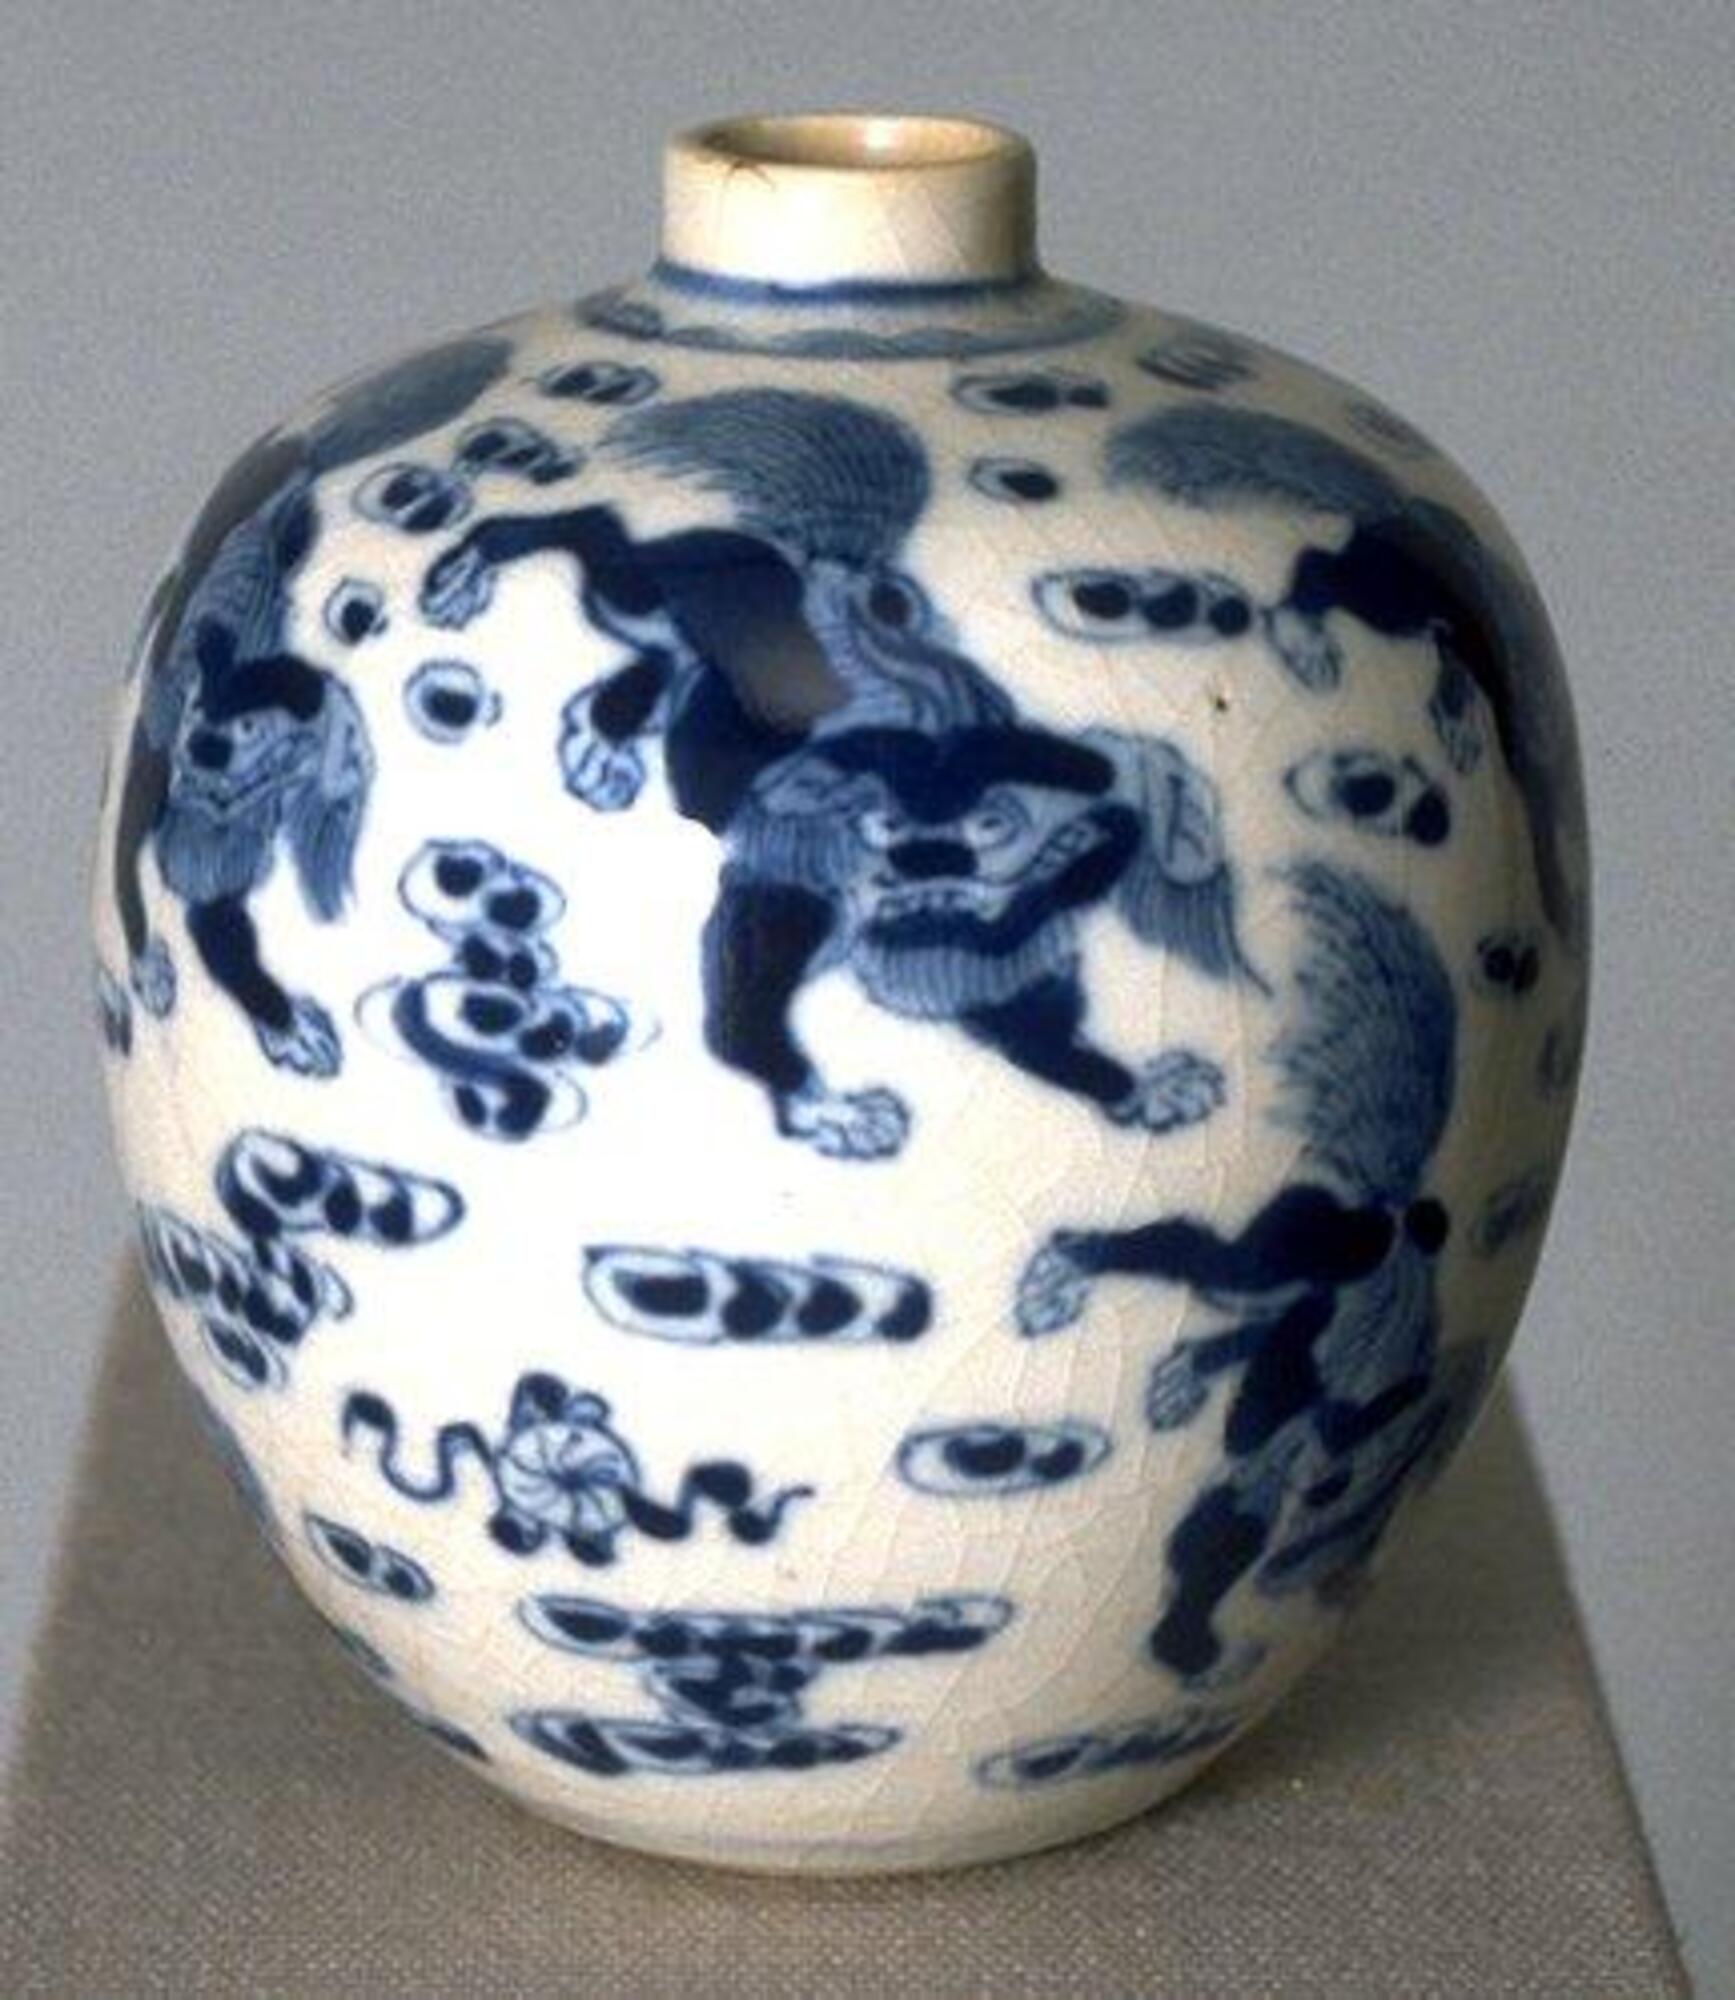 A porcelain globular jar with narrow straight neck and direct rim, on a recessed footring, covered in underglaze cobalt blue paintings of lions among clouds, then covered in clear glaze. It is missing the dome cap lid, and forms a pair with 1977/2.11.